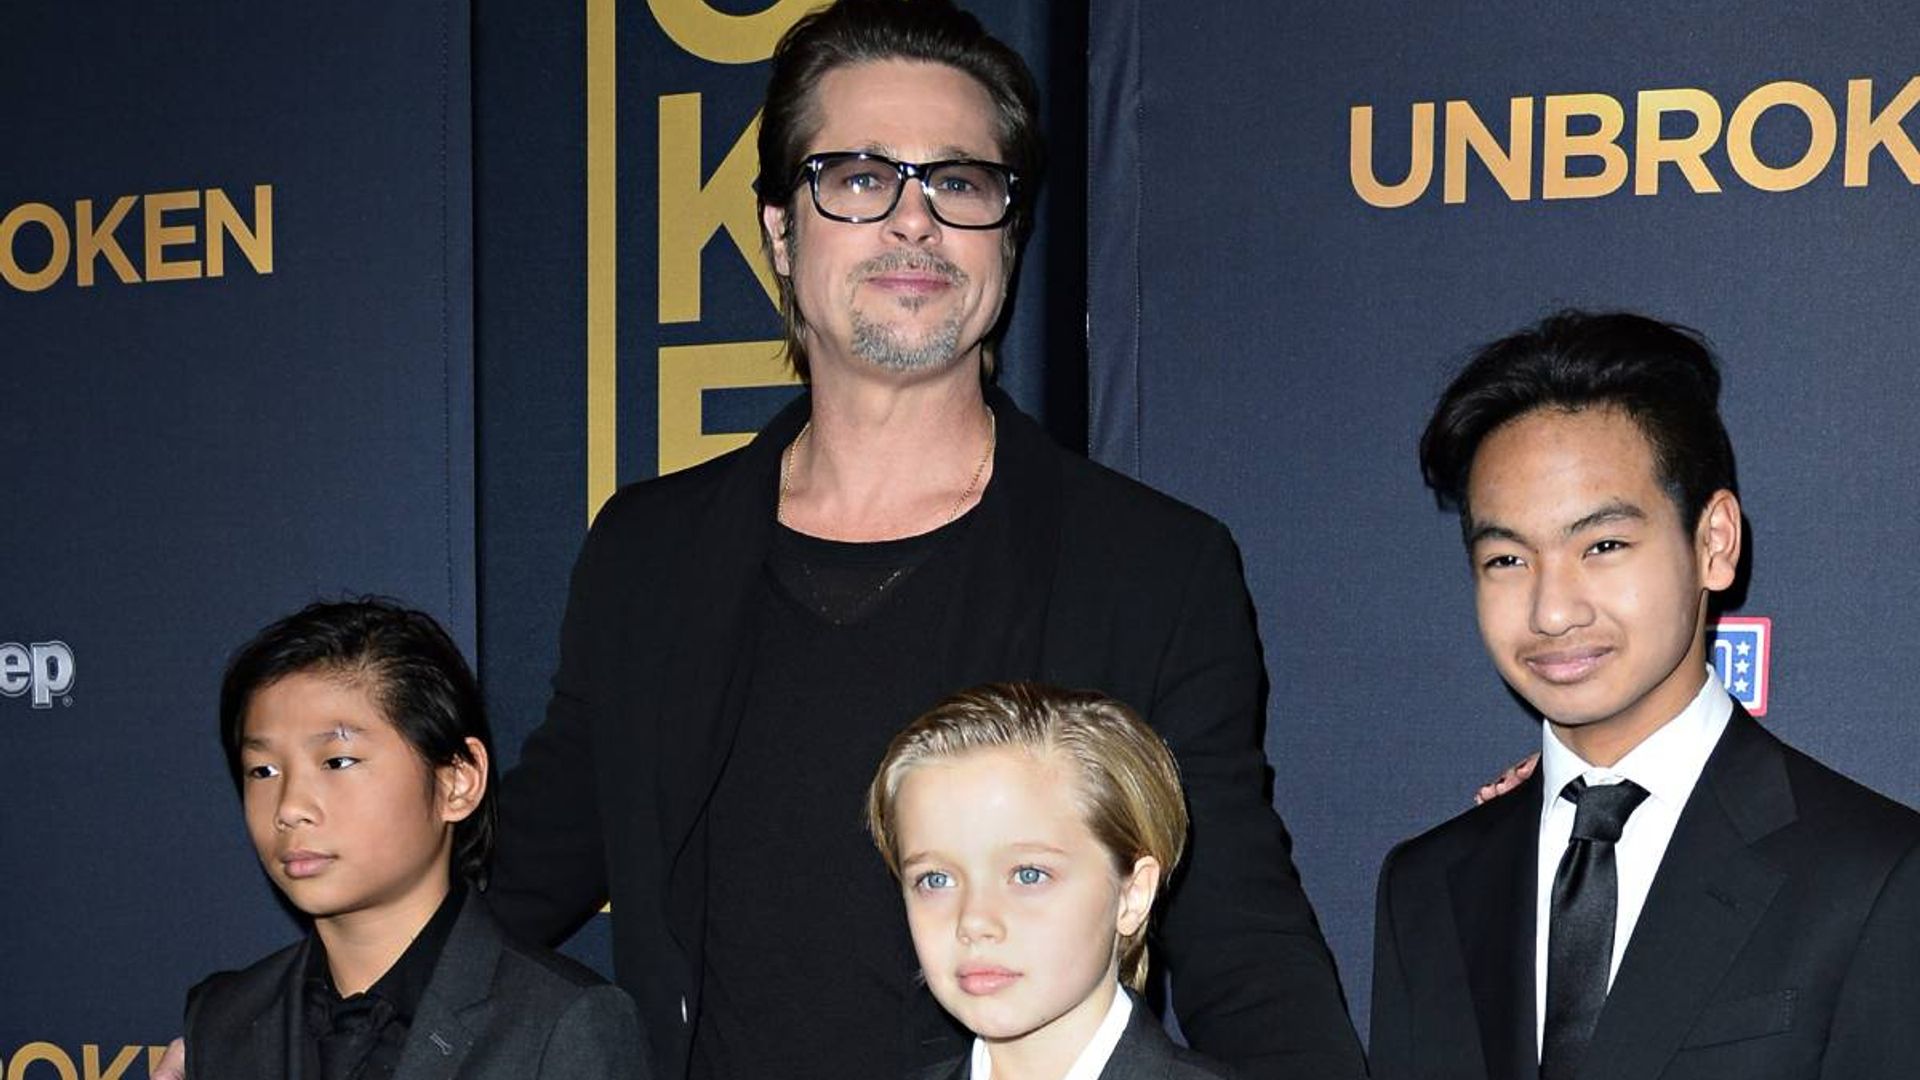 Brad Pitt reveals his hopes for his children and how he would react if they became actors